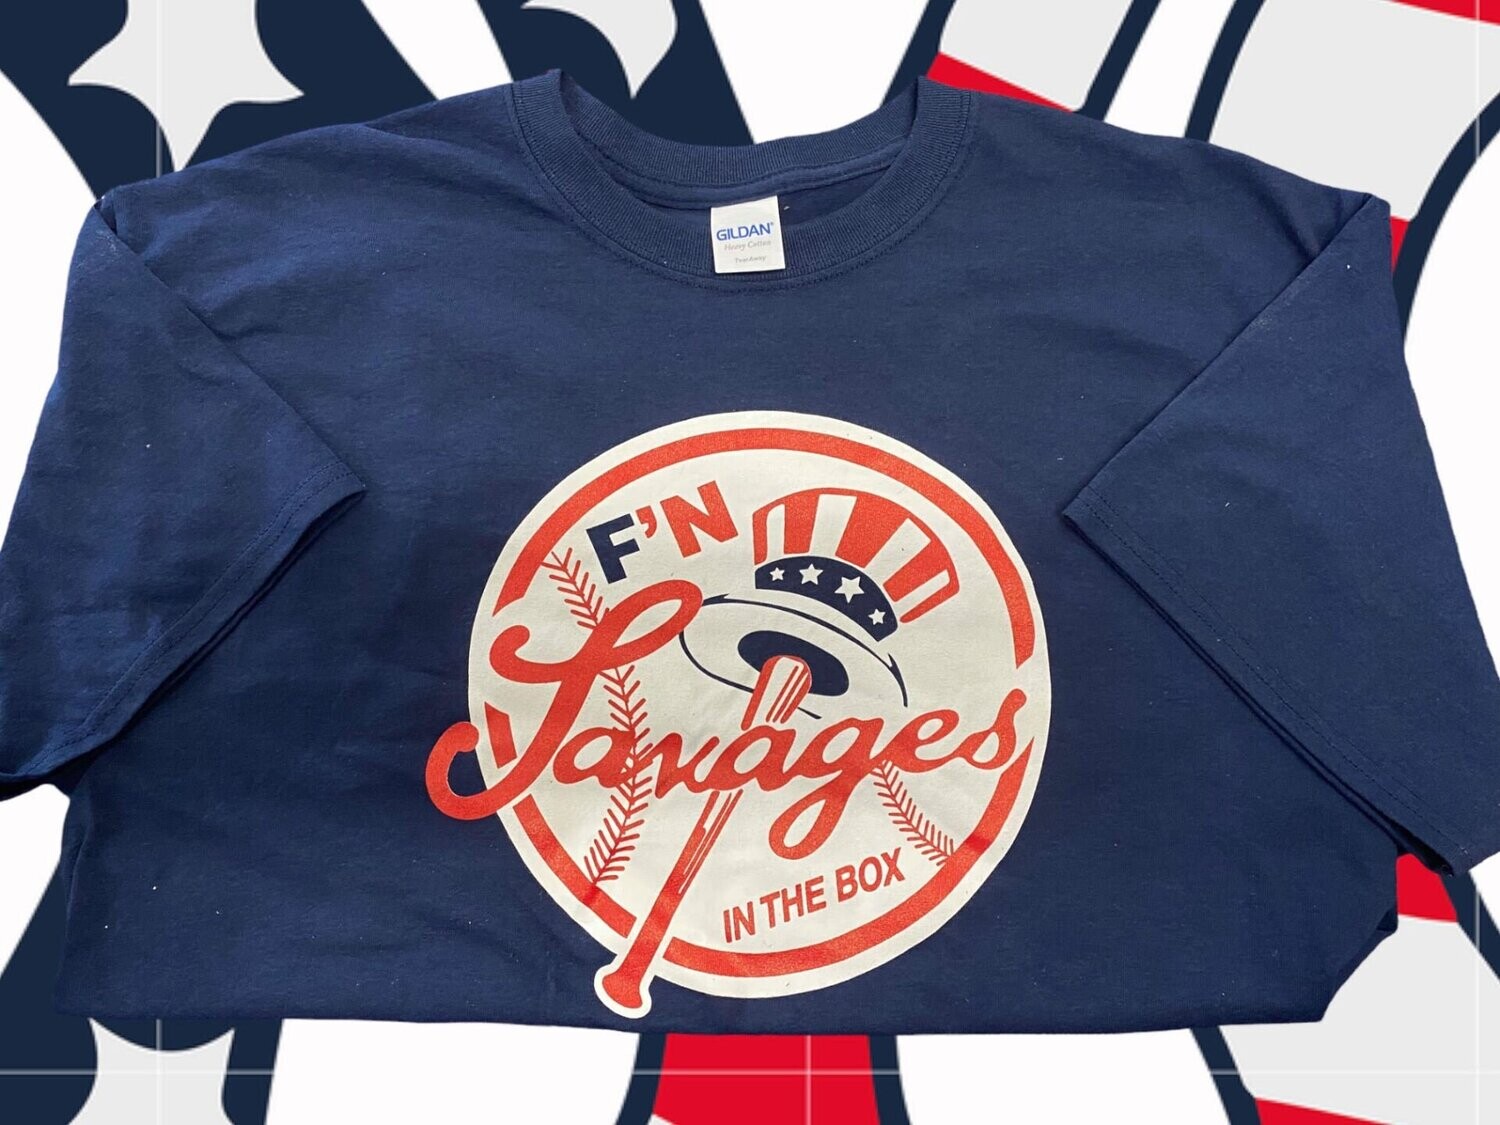 NY Yankees “Savages In The Box” Large T Shirt